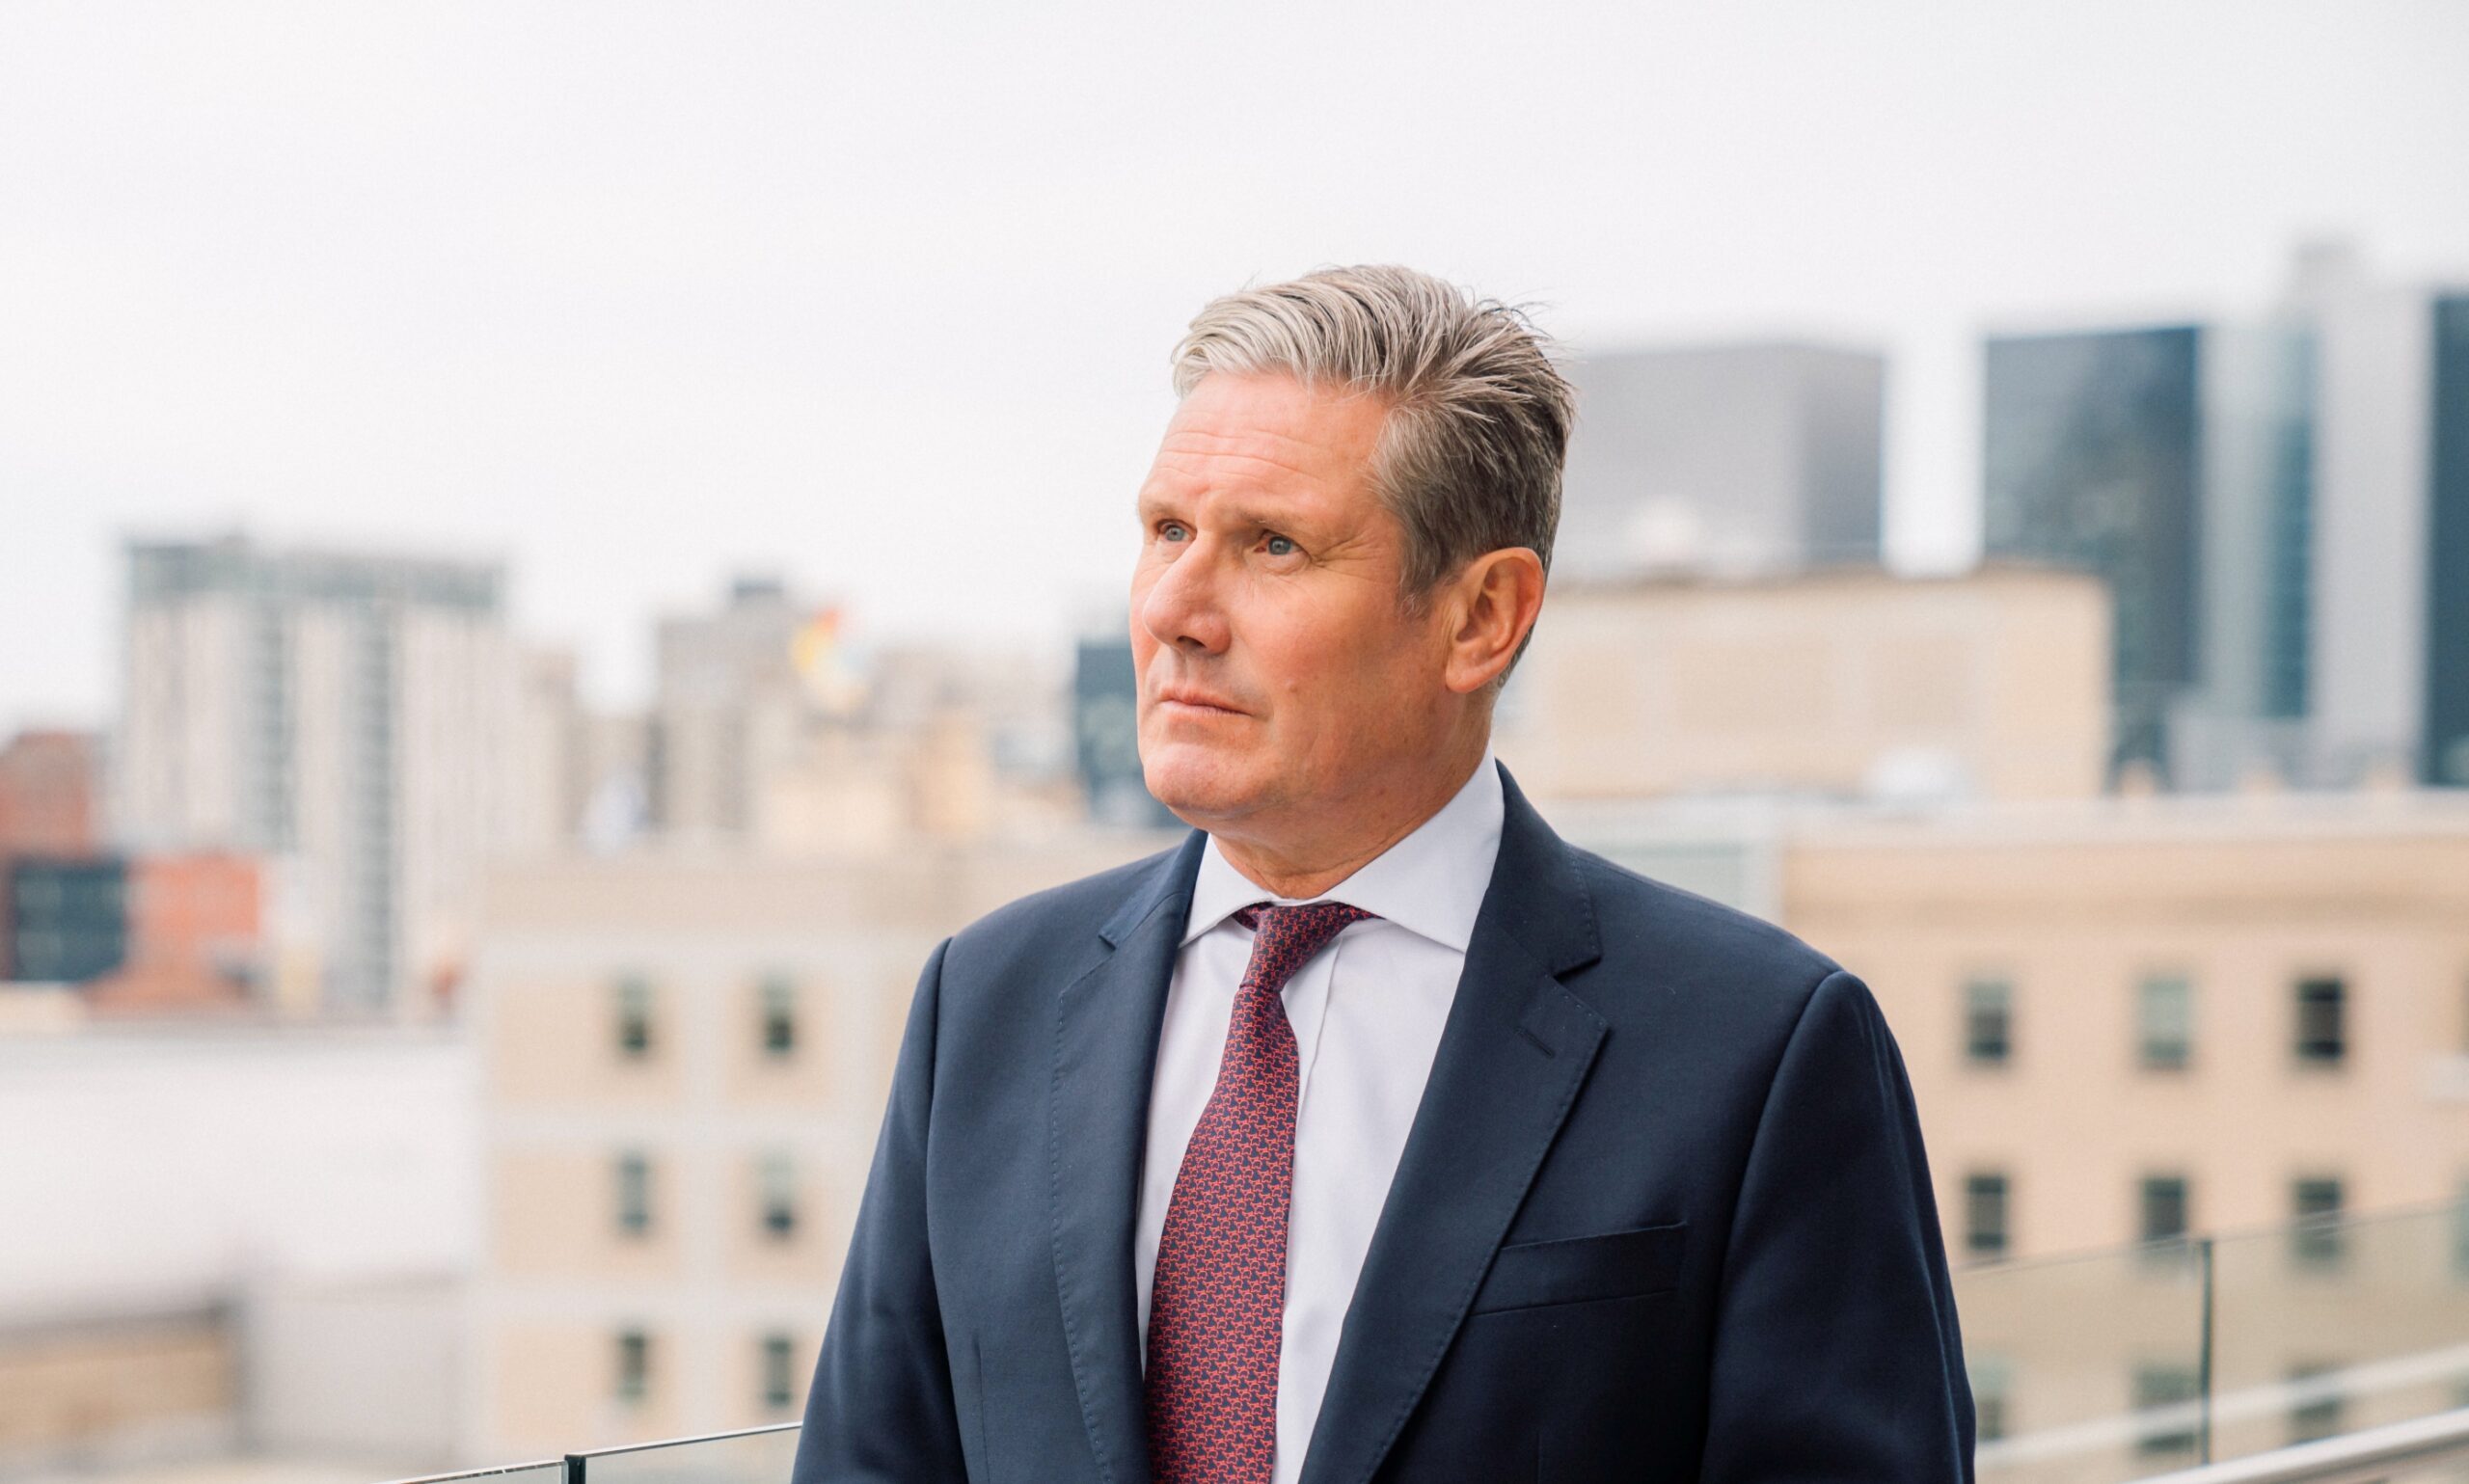 A portrait of Keir Starmer wearing a suit and tie.